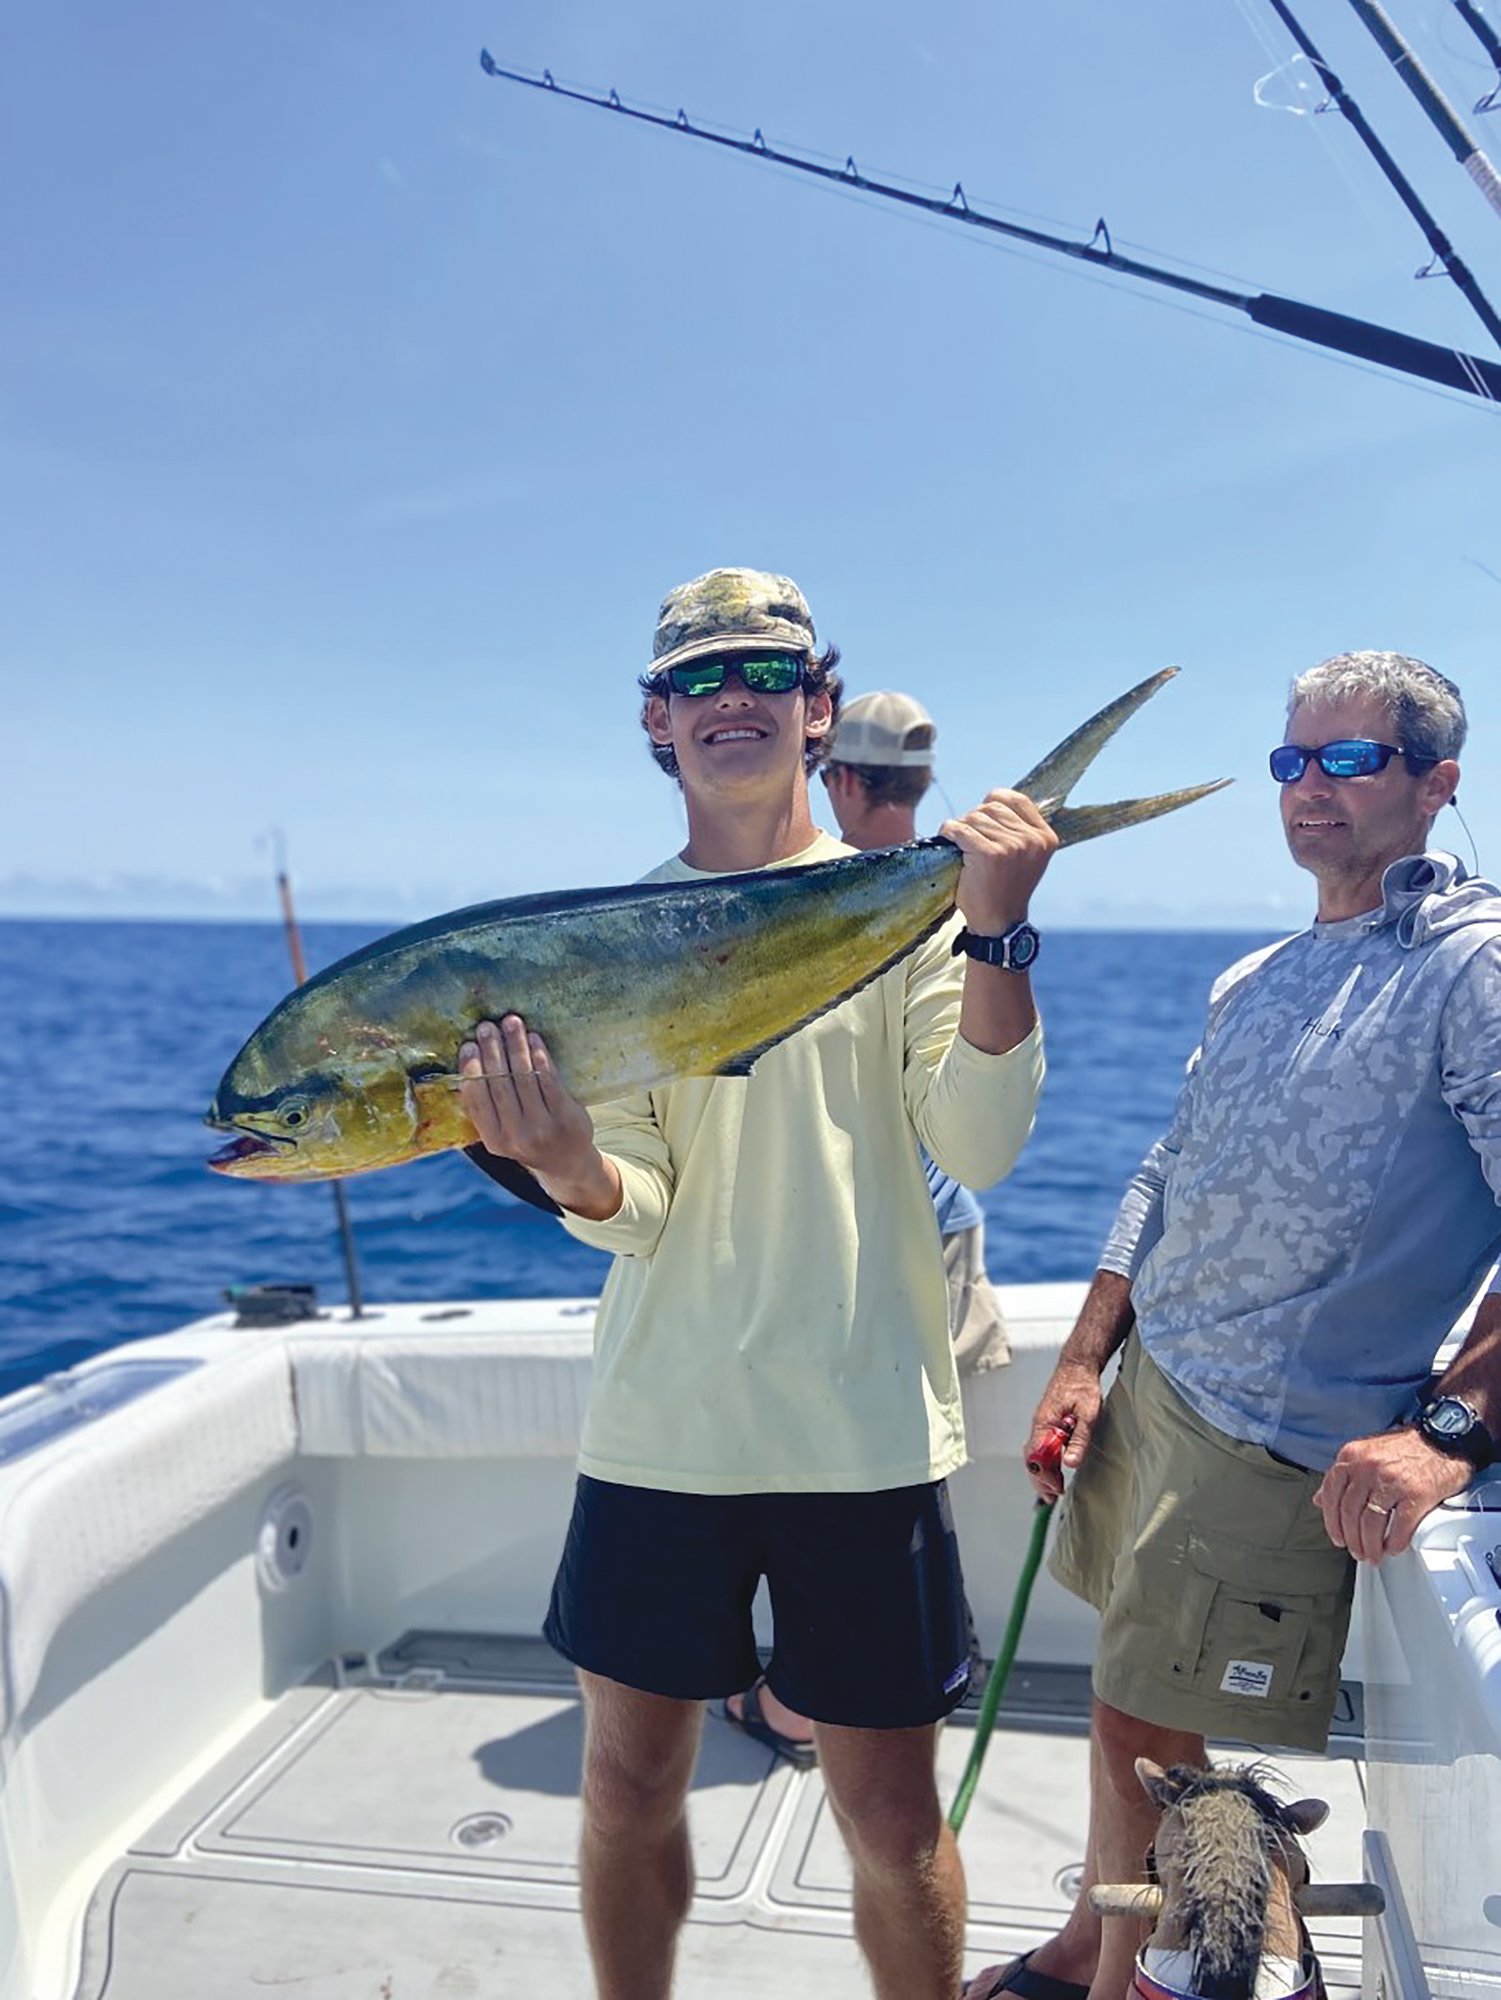 Charlie Noonan holds up the world-record pompano dolphinfish he caught in June 2022 off the North Carolina coast. The fish weighed 11.5 pounds.